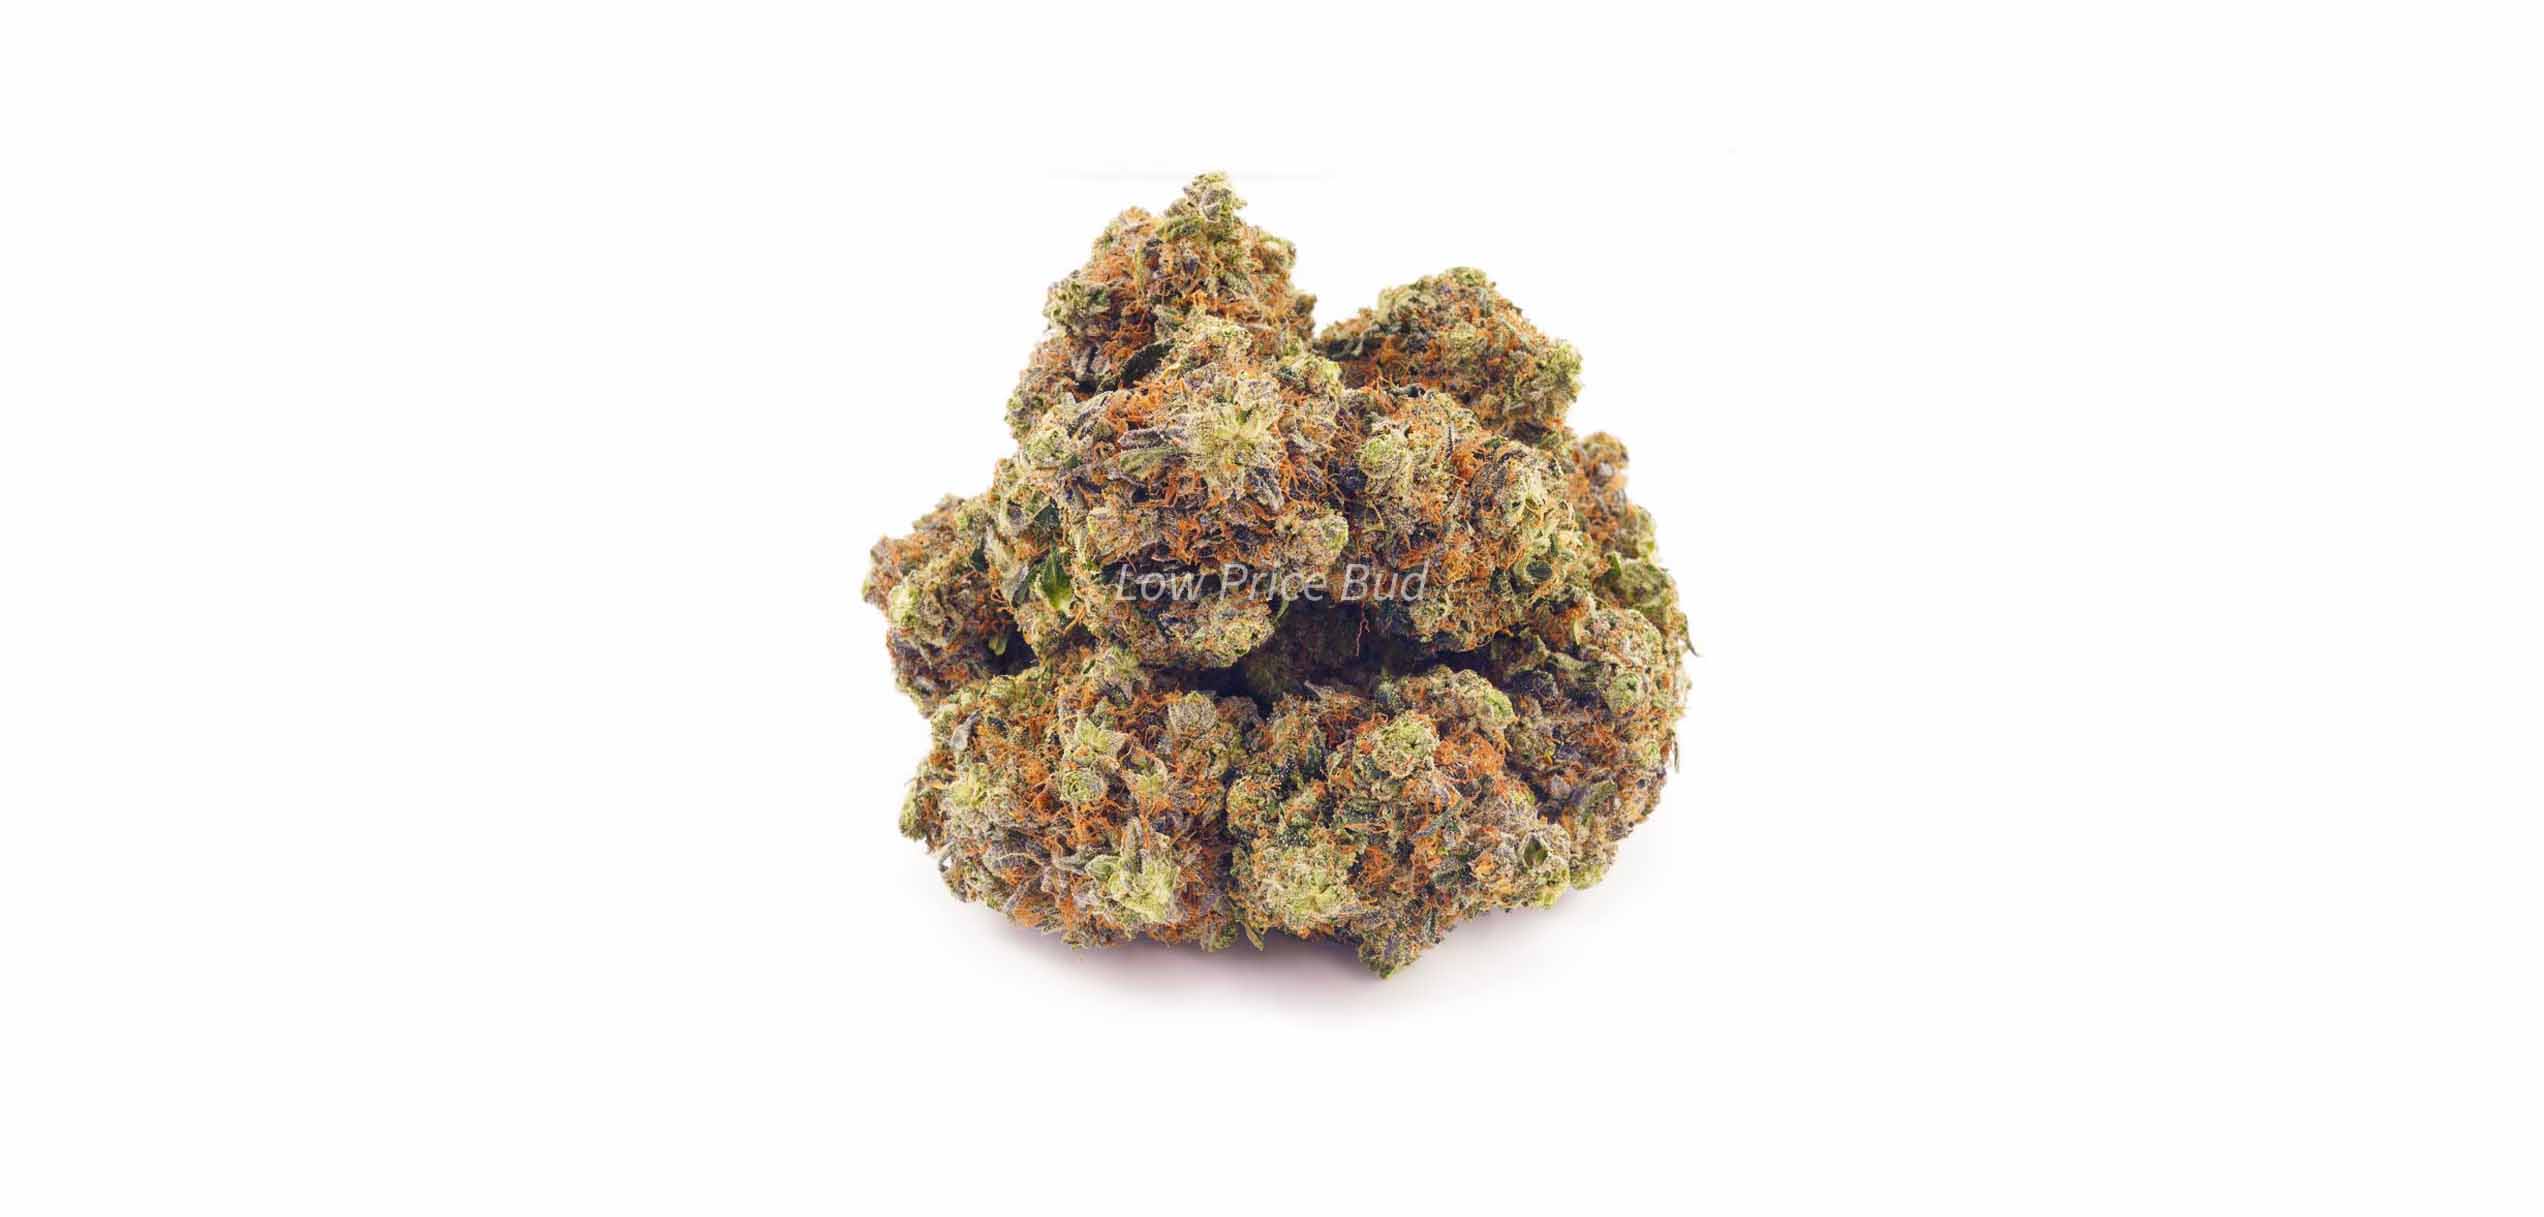 Island Pink Kush value buds from cheapweed dispensary for BC cannabis Low Price Bud. cheap weed online. cheap ounces of weed. buy weed.